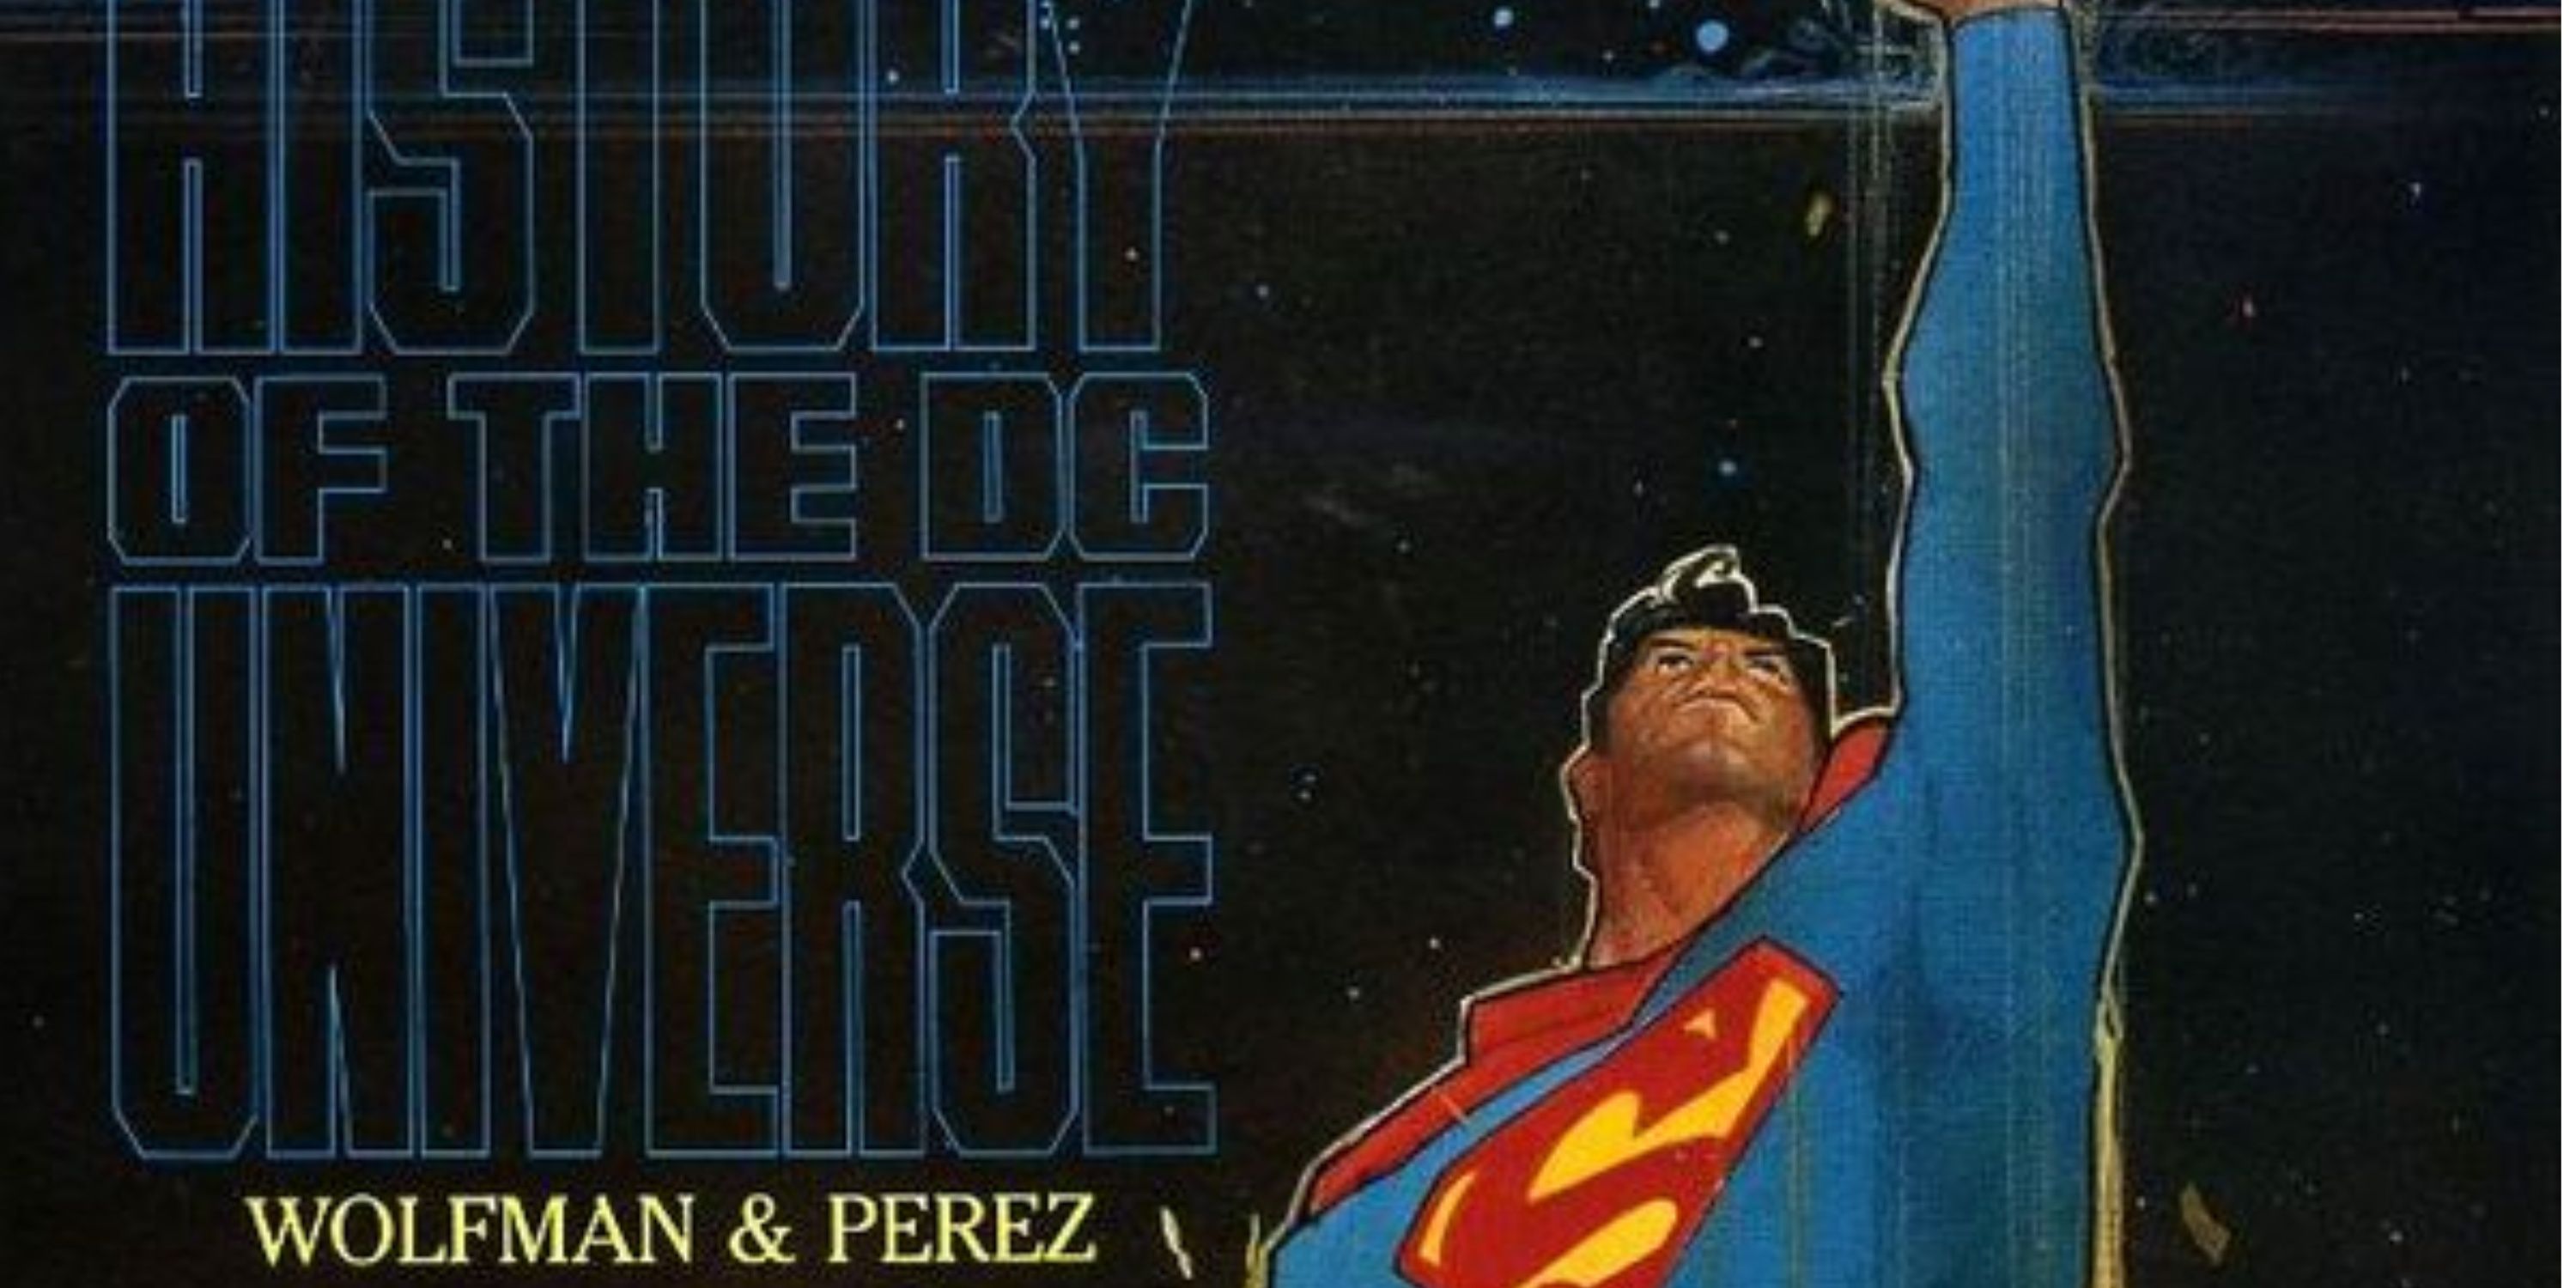 The History of the DC Universe by Marv Wolfman and George Perez featuring Superman